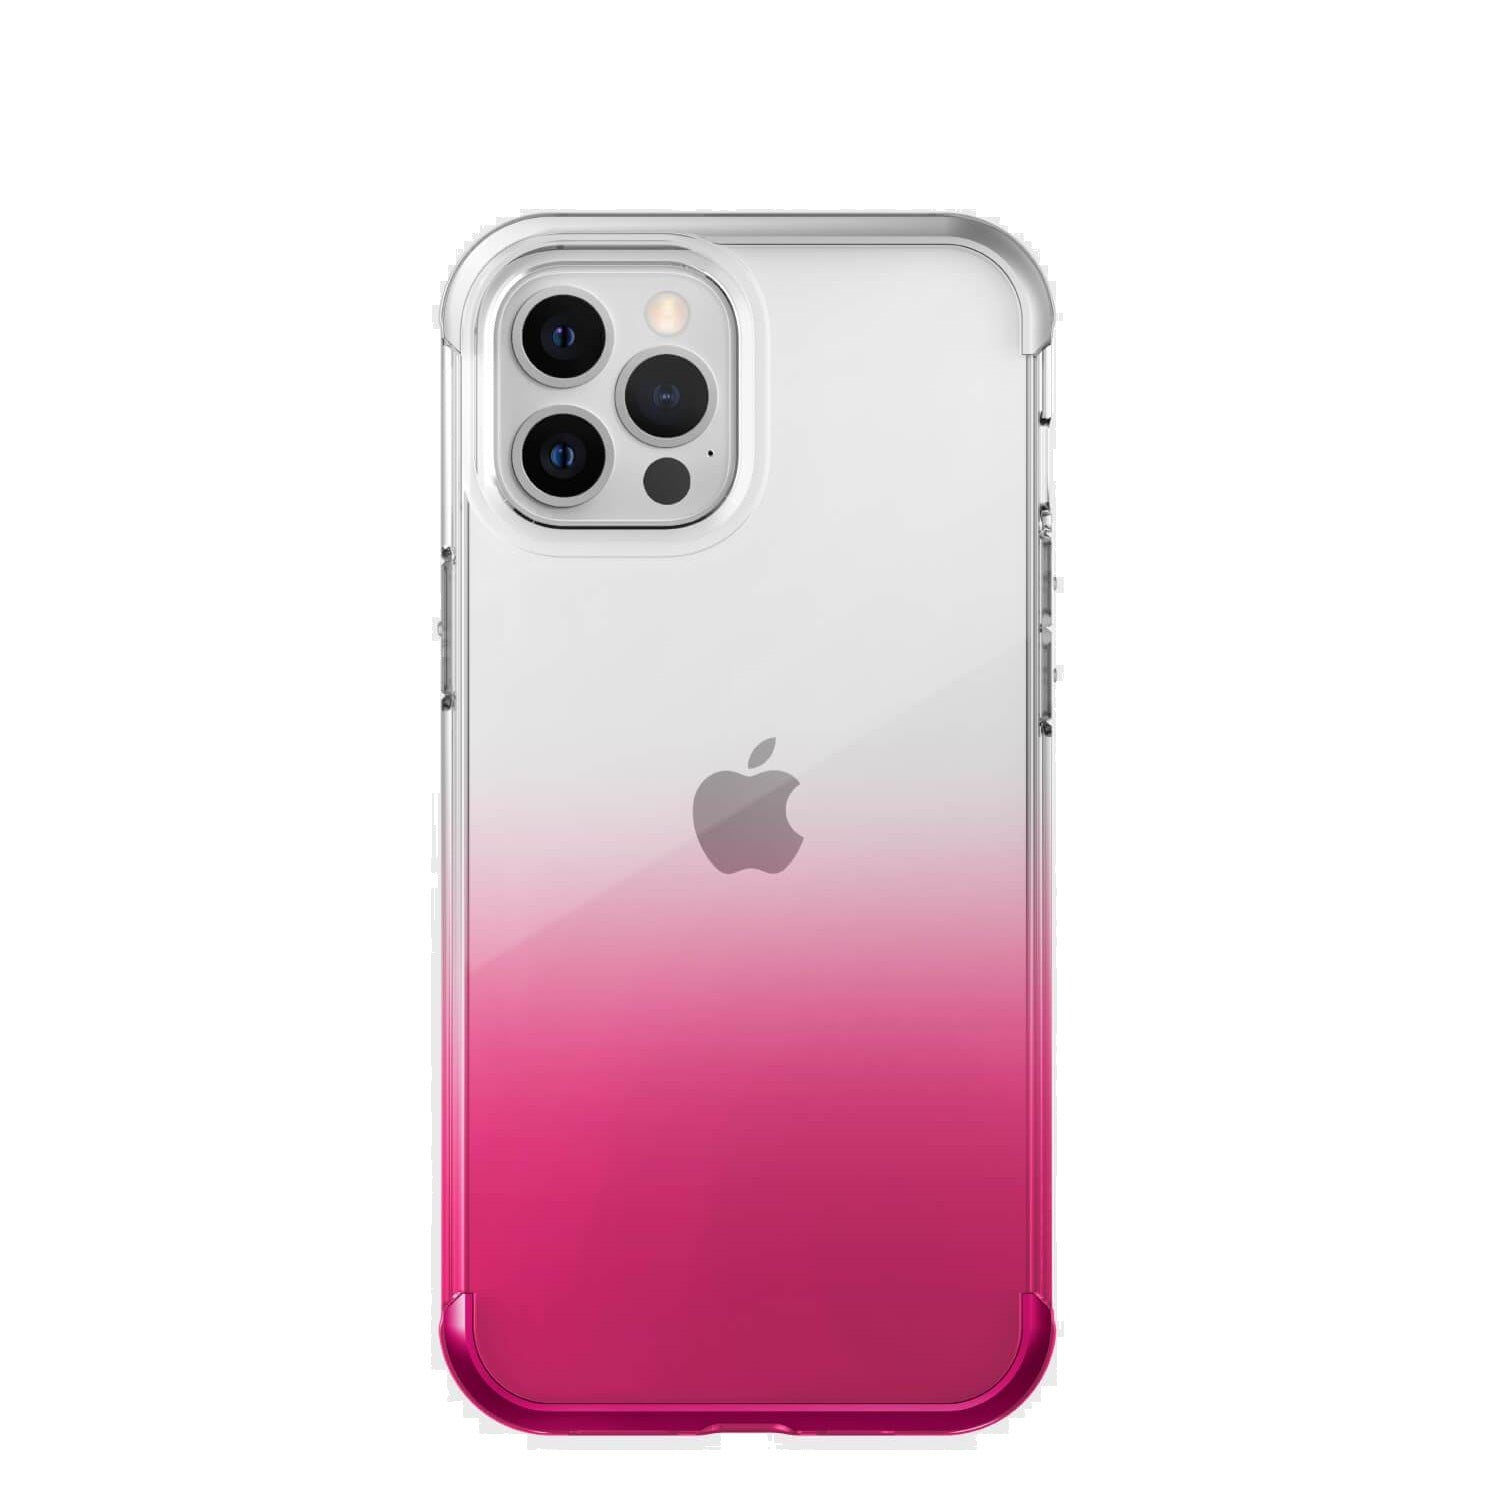 https://caserace.net/products/x-doria-defense-clear-back-cover-for-iphone-iphone-12-pro-max-6-7-pink-gradient